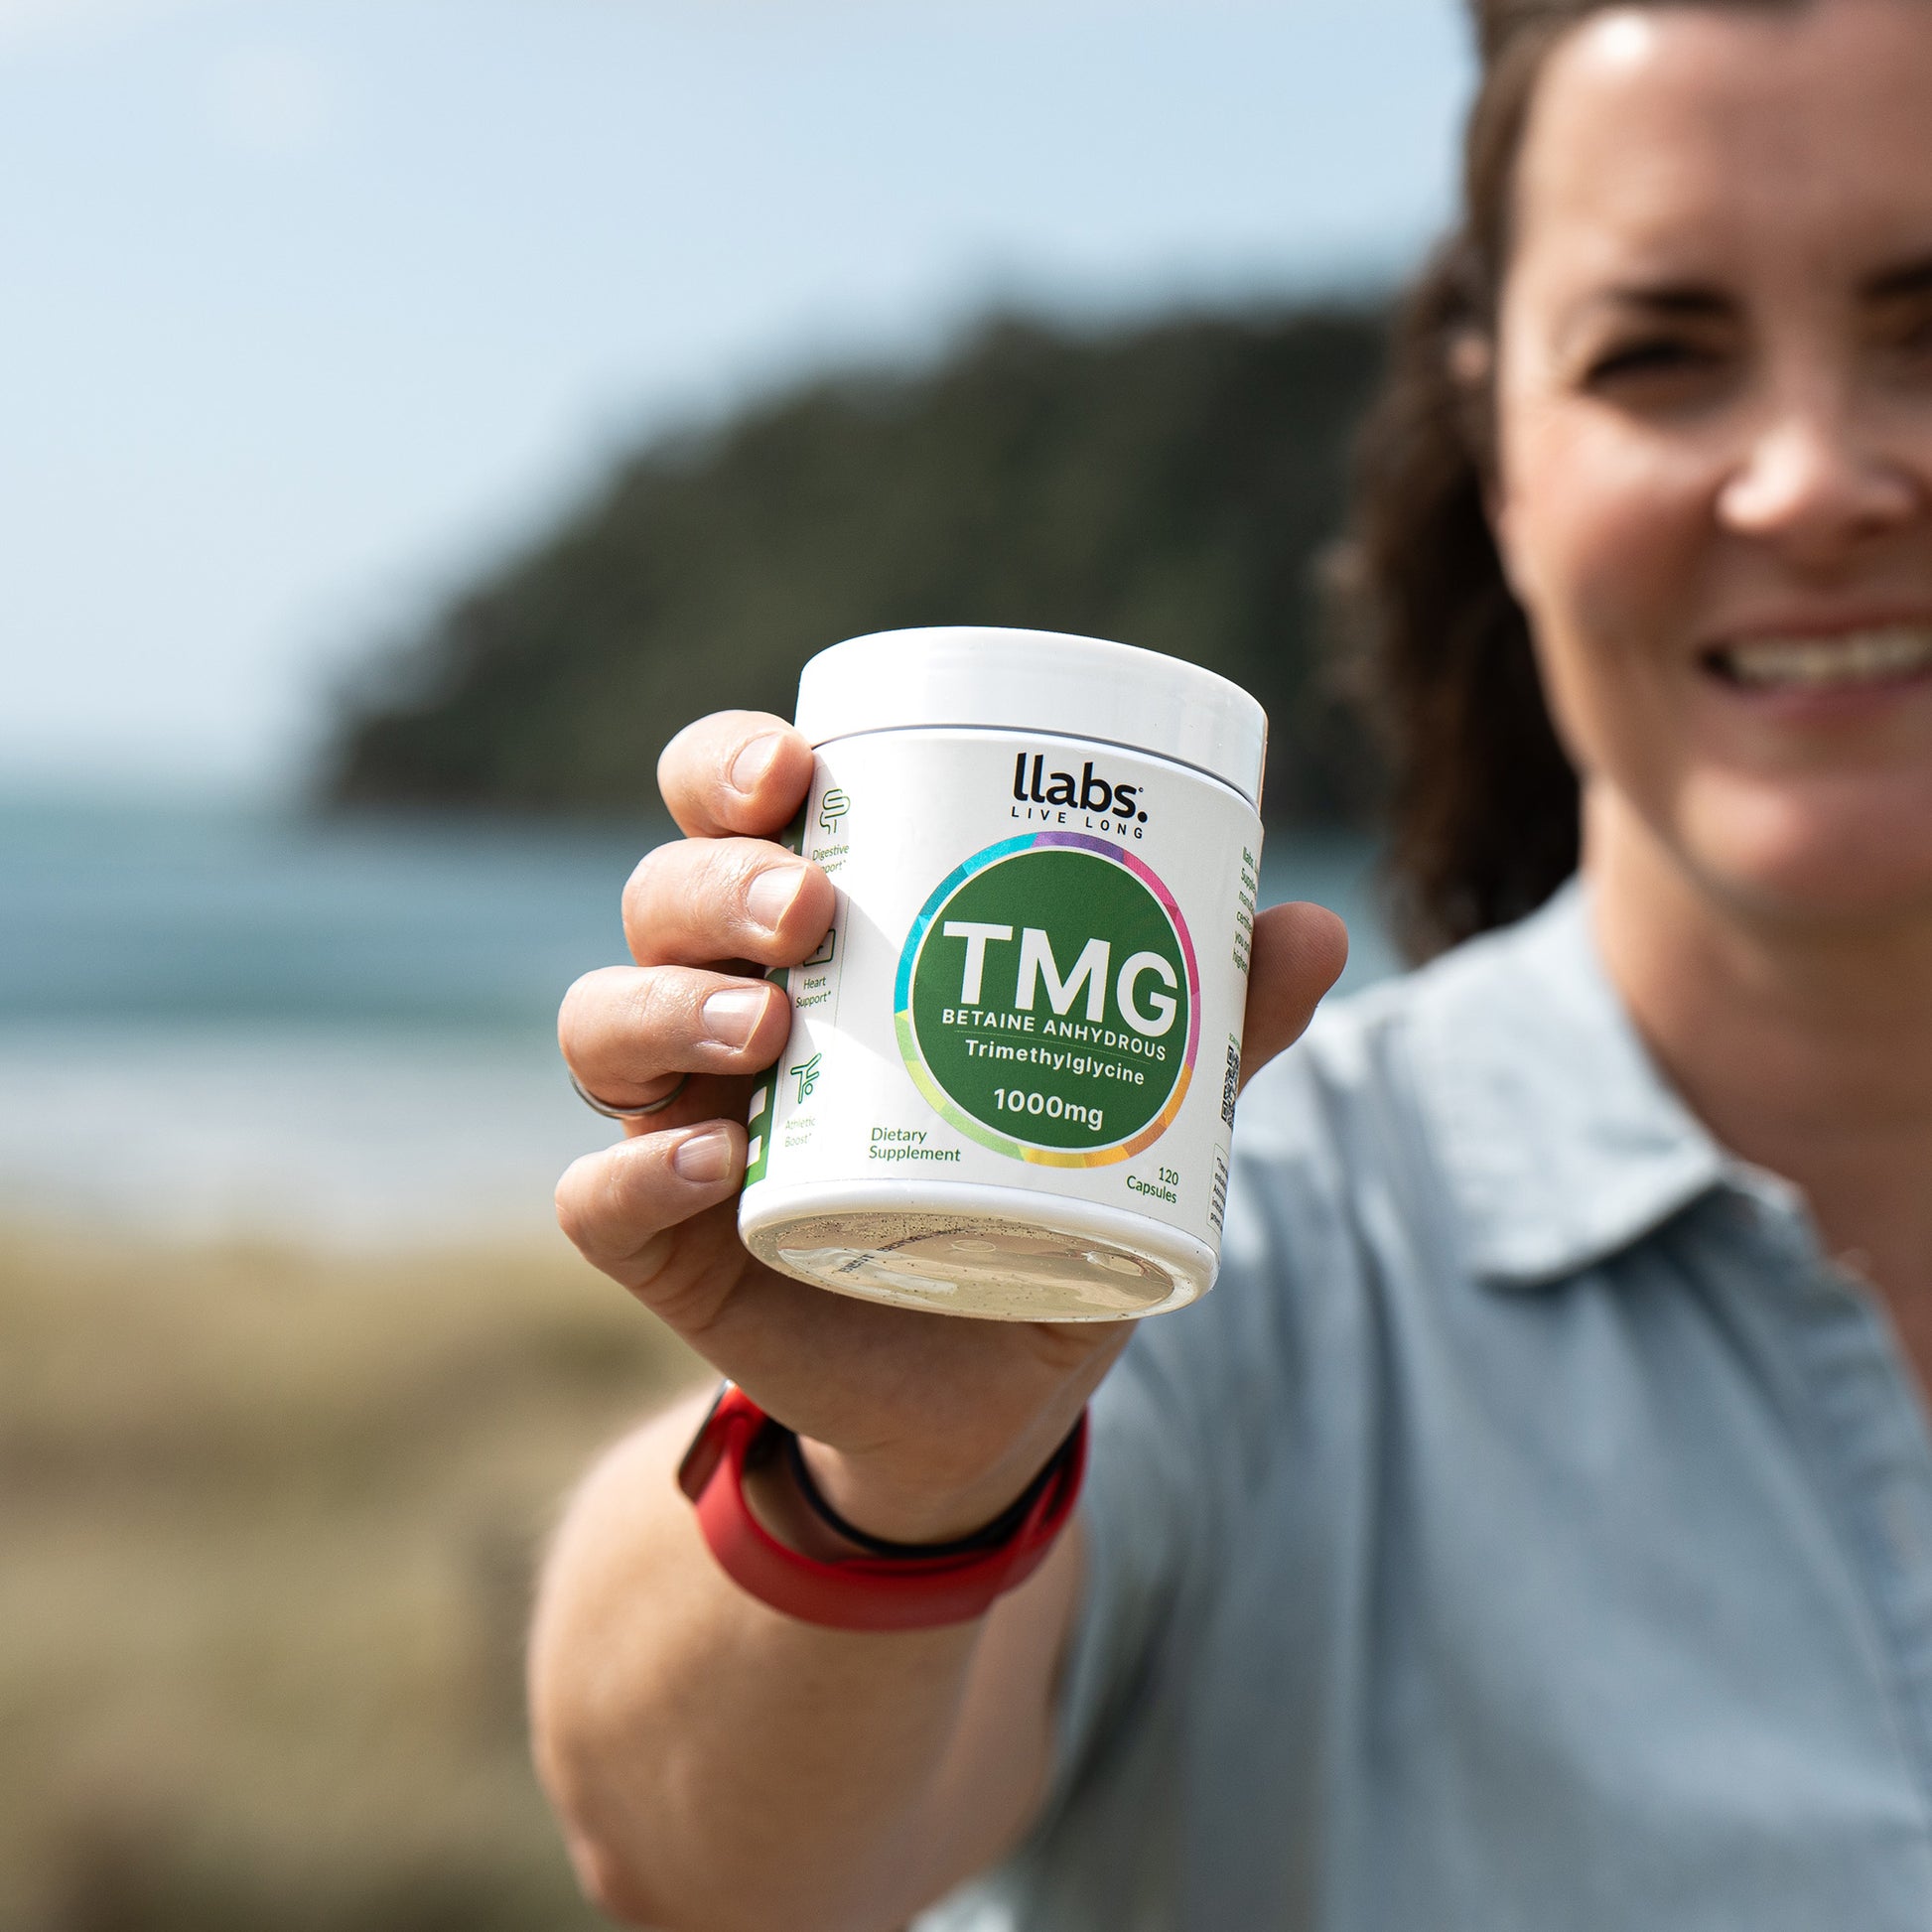 A smiling woman outdoors holding a container of llabs. TMG (Betaine) Capsules, focusing the camera on the product with a natural background to enhance her daily routine.